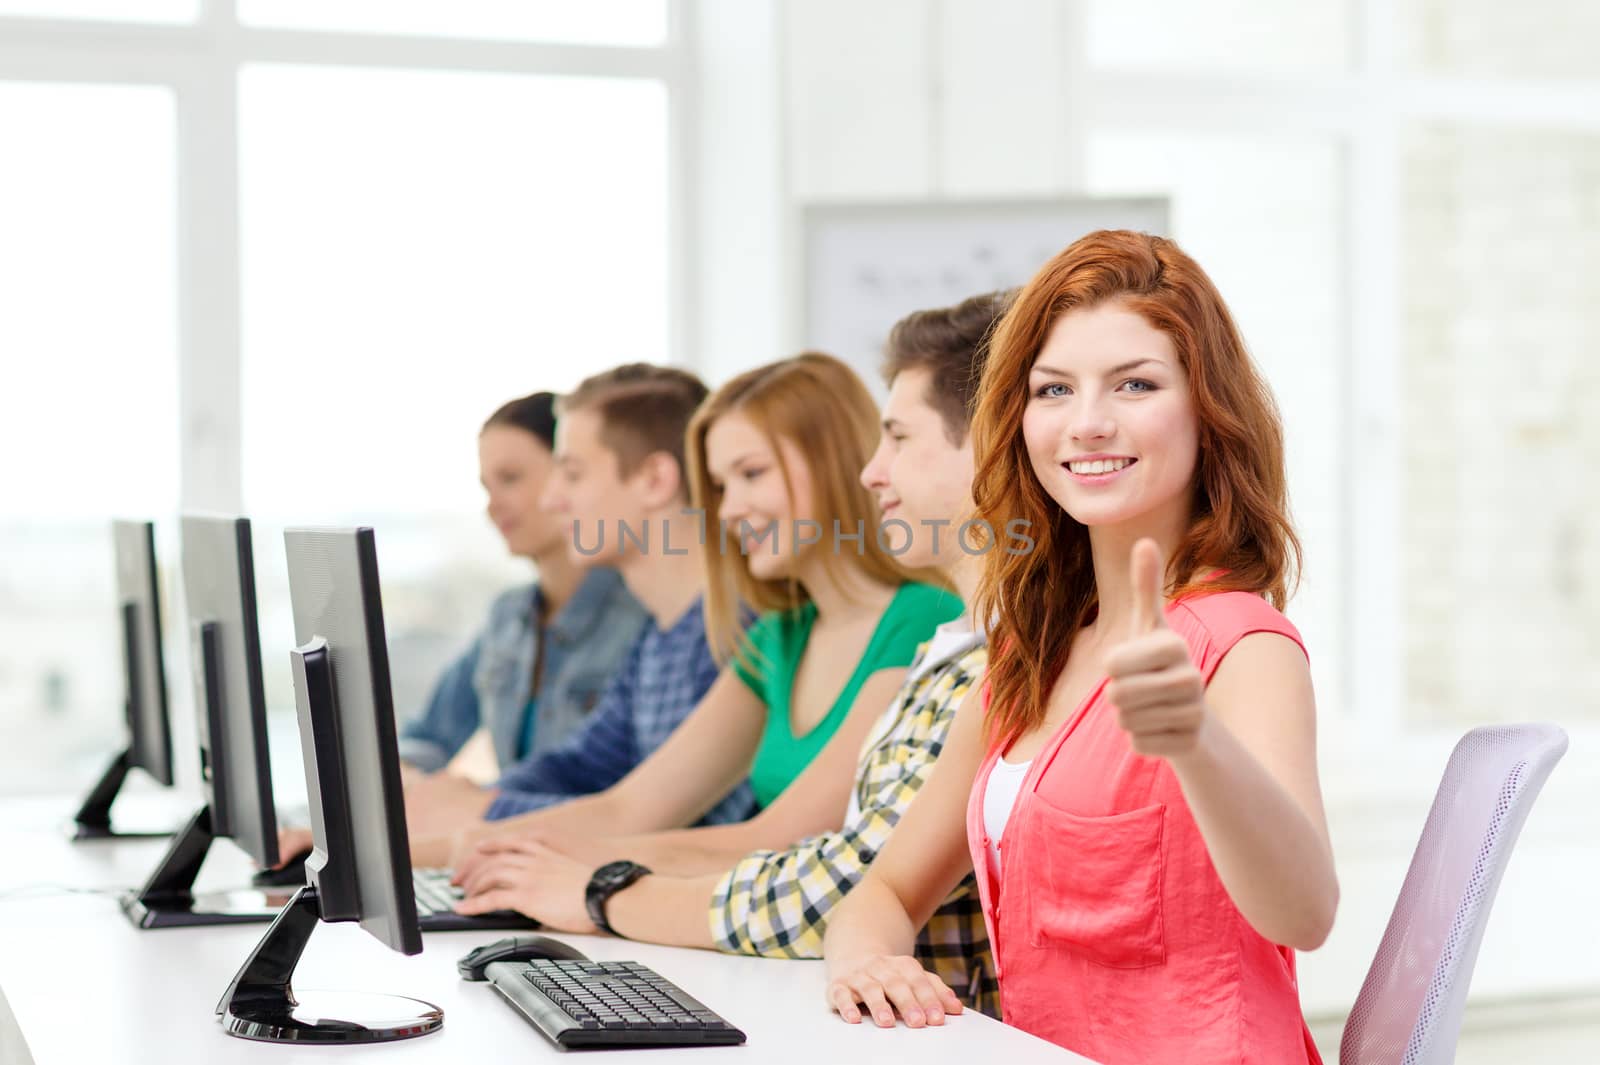 education, technology and school concept - smiling female student with classmates in computer class at school showing thumbs up